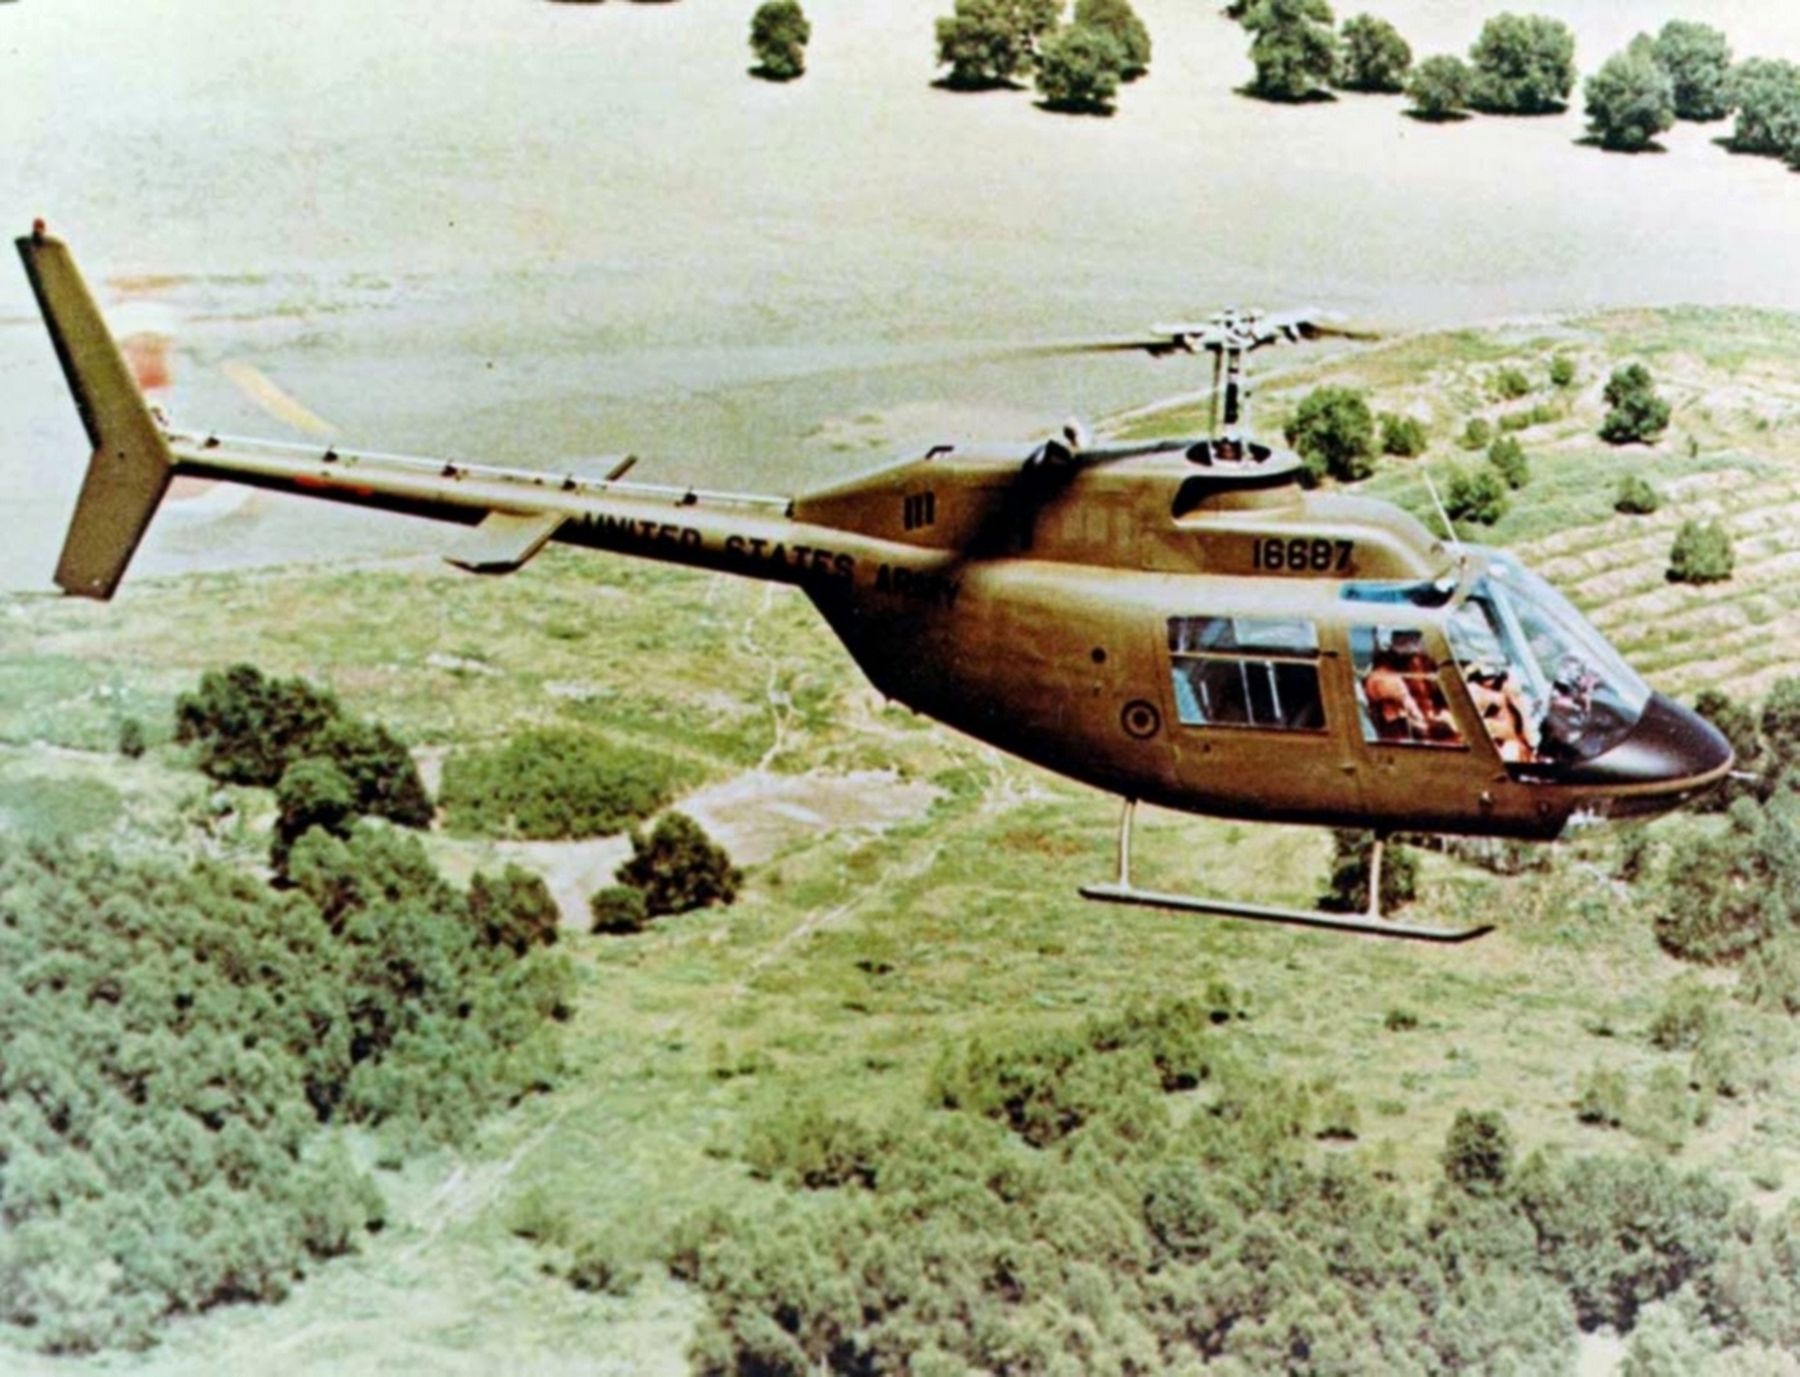 A U.S. Army Bell OH-58A-BF Kiowa (s/n 68-16687) in flight. image. Click for full size.